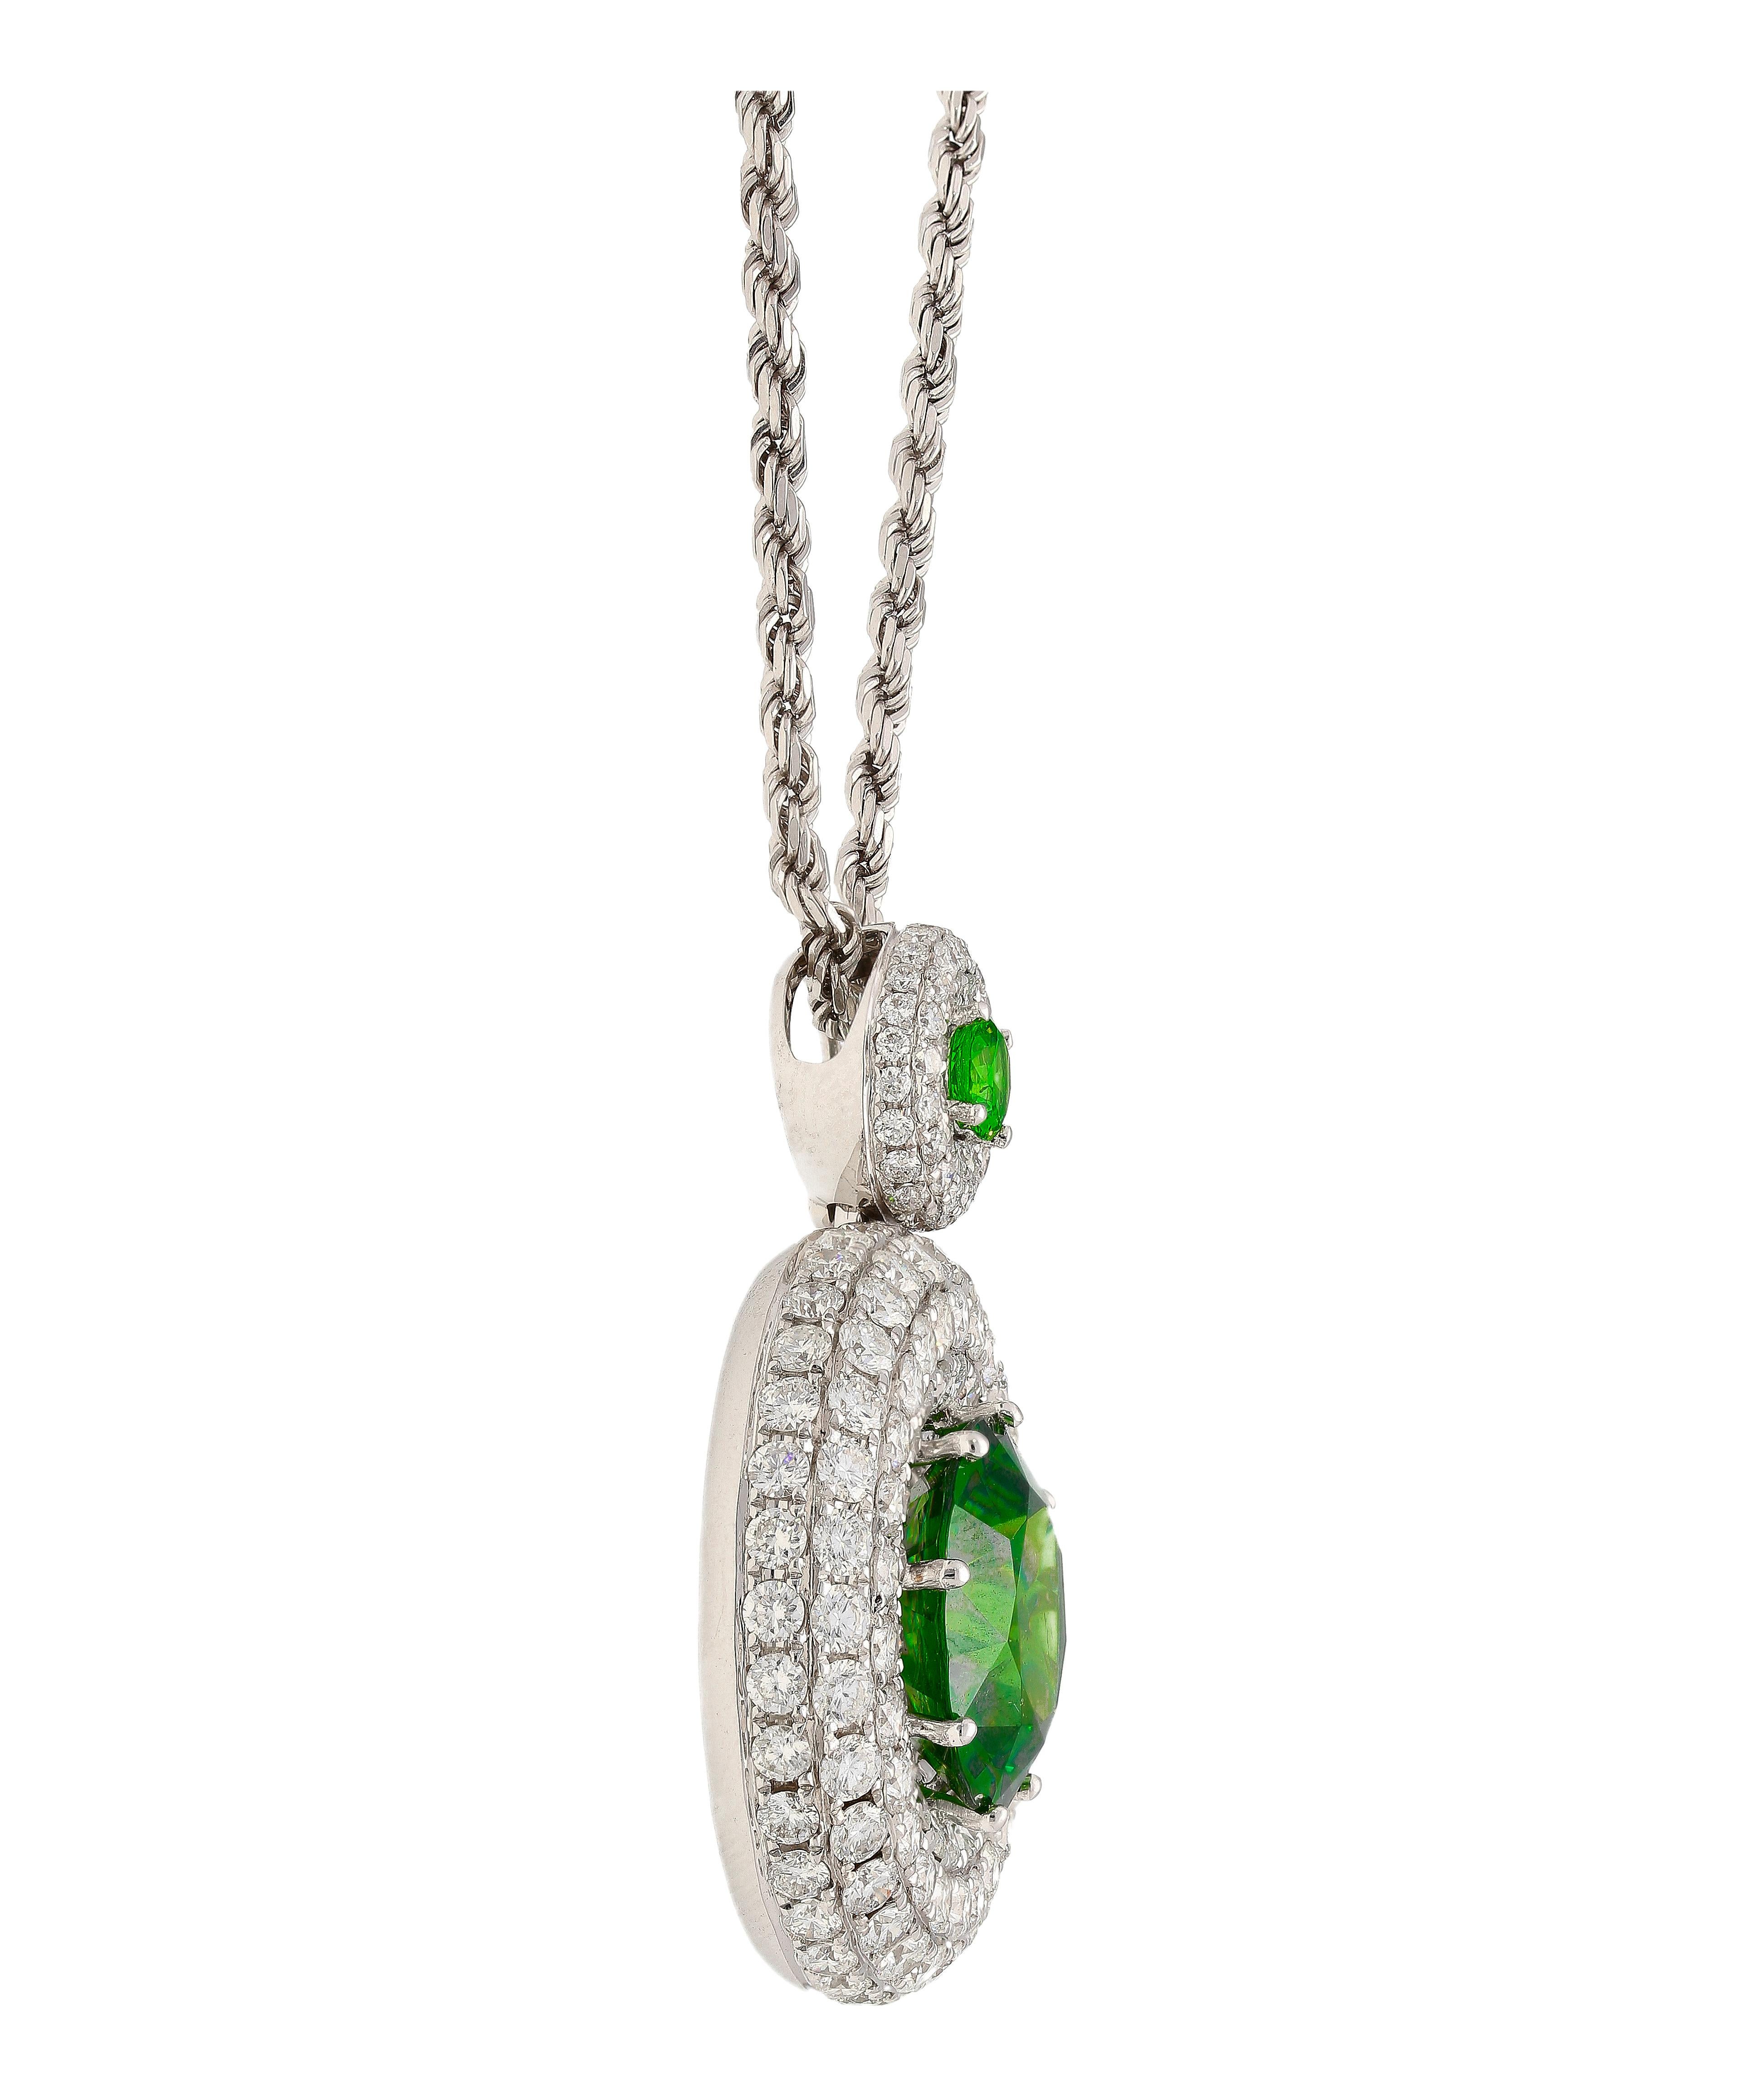 Round Cut GIA Certified 8.58 Carat Demantoid Necklace w/ Diamond Halo in 18K White Gold For Sale